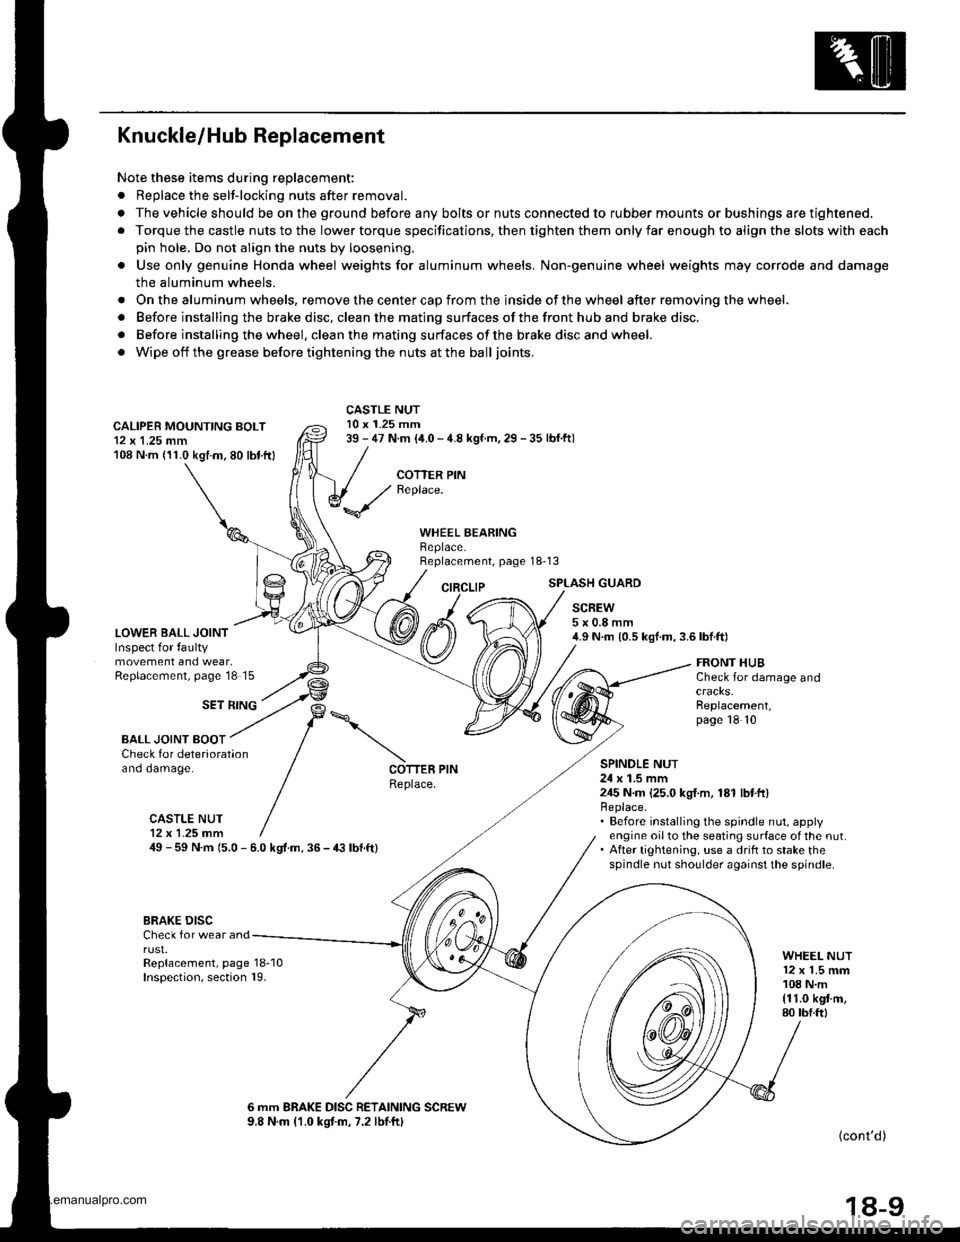 HONDA CR-V 1998 RD1-RD3 / 1.G User Guide 
Knuckle/Hub Replacement
Note these items during replacement:
. Replace the selt-locking nuts after removal.
. The vehicle should be on the ground before any bolts or nuts connected to rubber mounts o